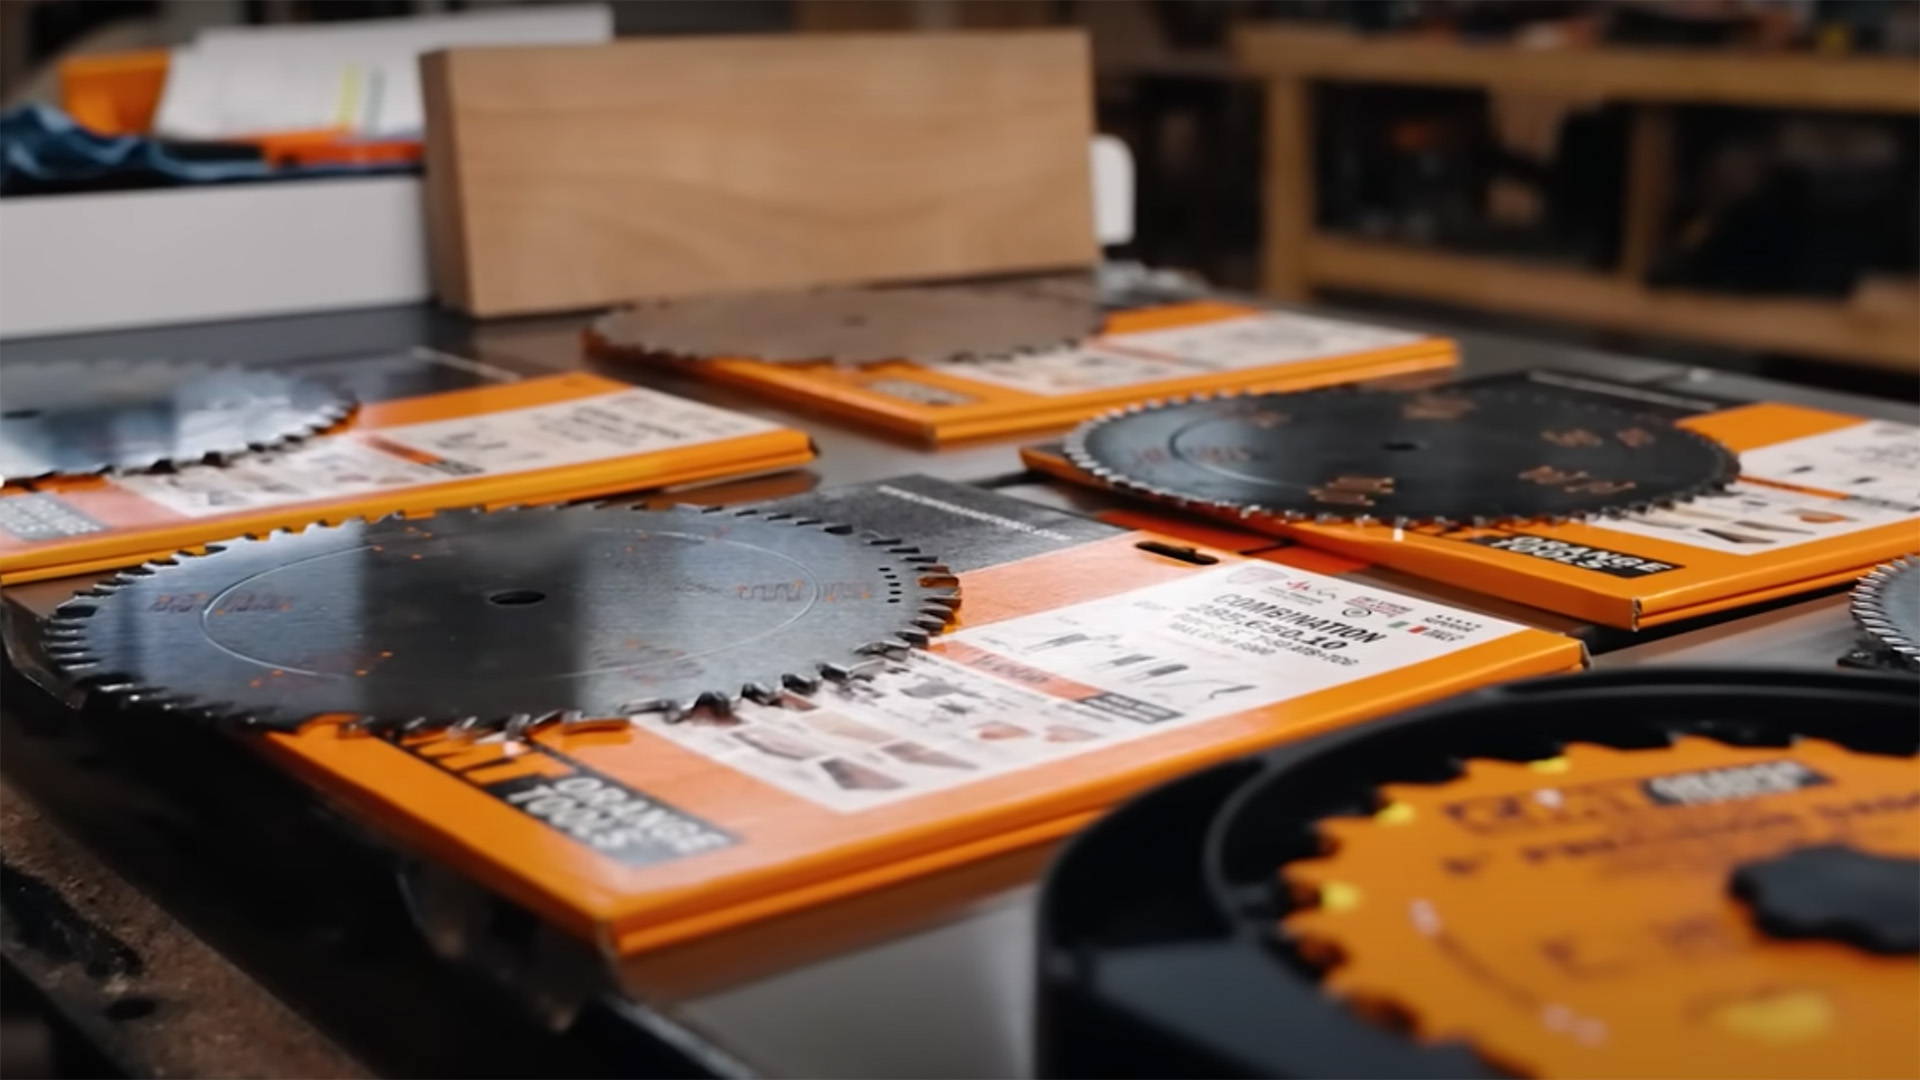 table saw blades